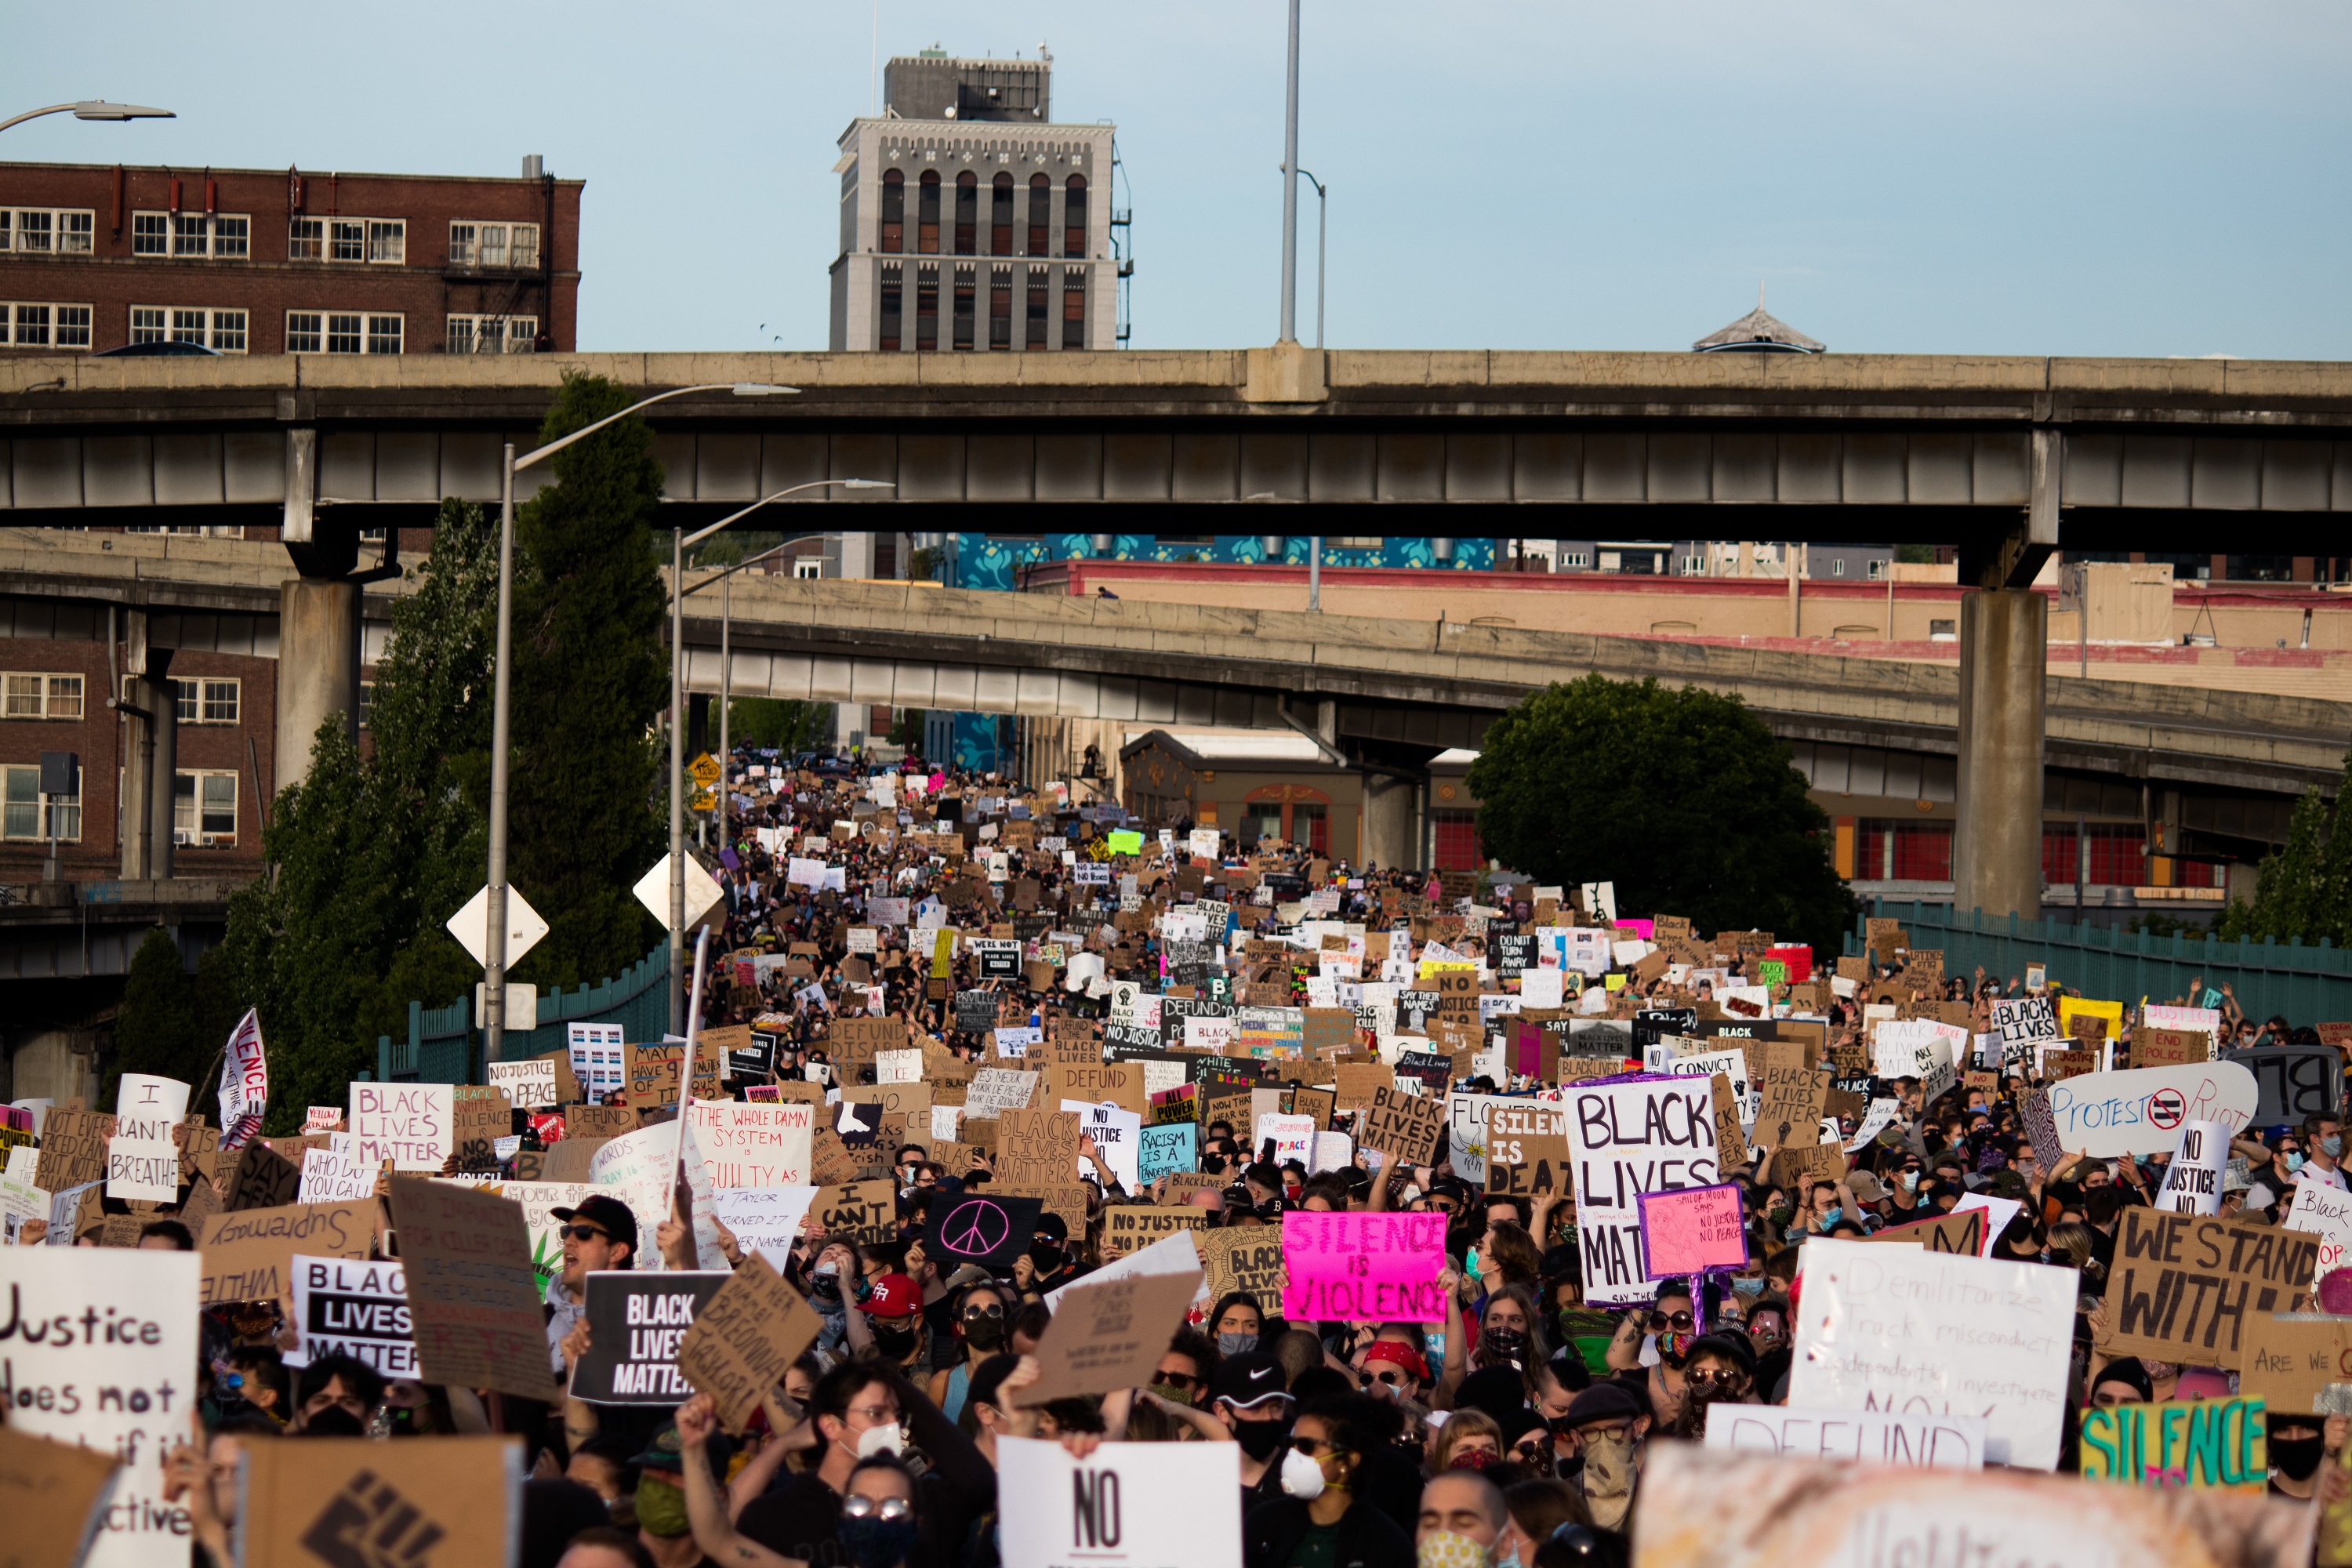 An extremely large crowd holding Black Lives Matter protest signs marches on a freeway.